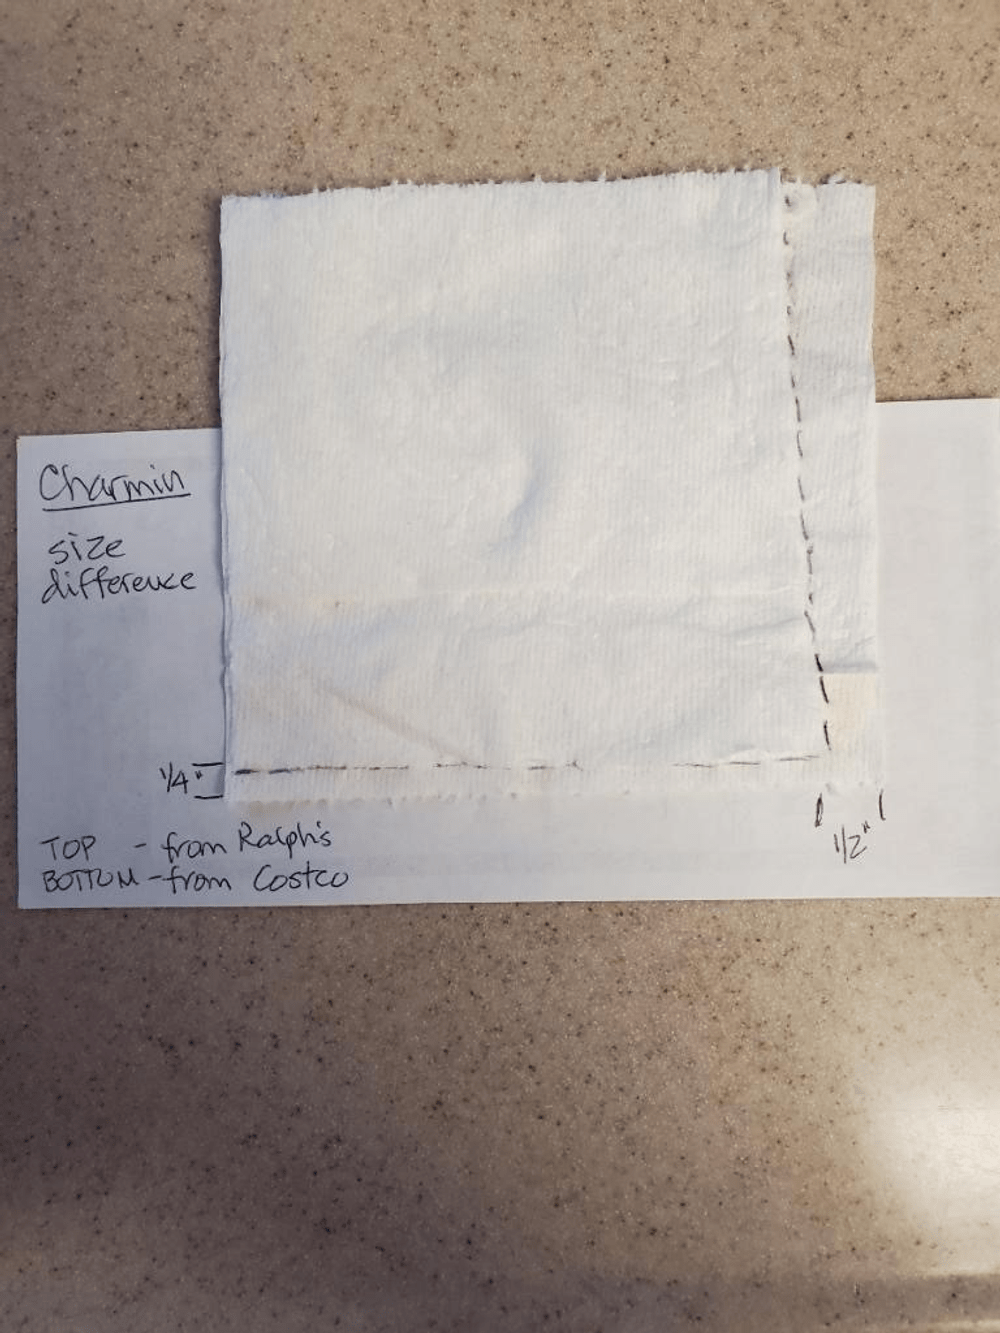 Melanie's size comparison of a square of Charmin Ultra Soft toilet paper from a newer package on top of a square from an older package.